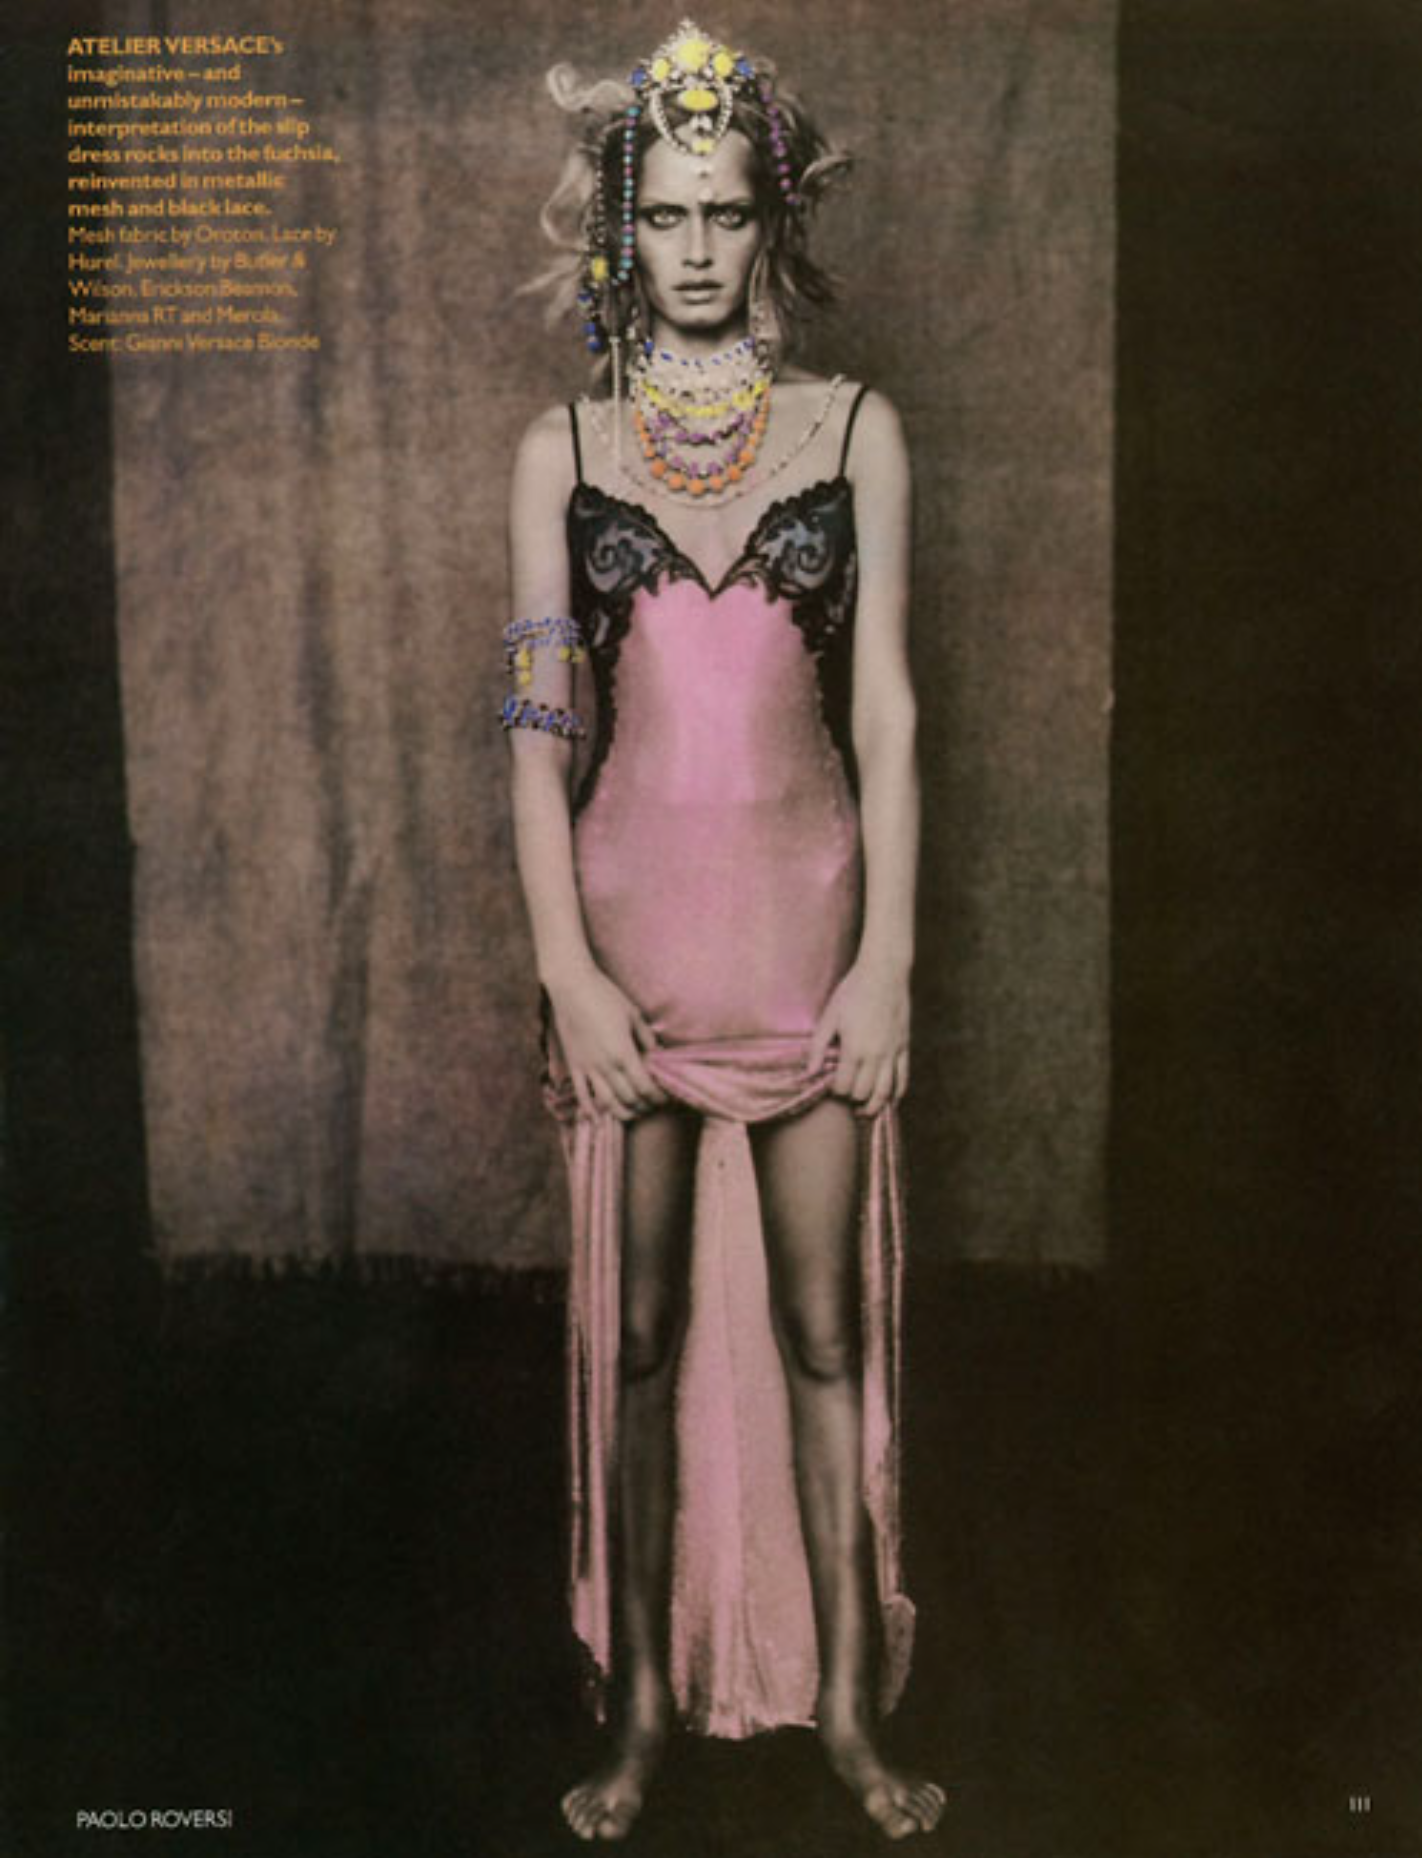 Shalom-Harlow-Amber-Valletta-Vogue-UK-by-Paolo-Roversi-2010-00003.png